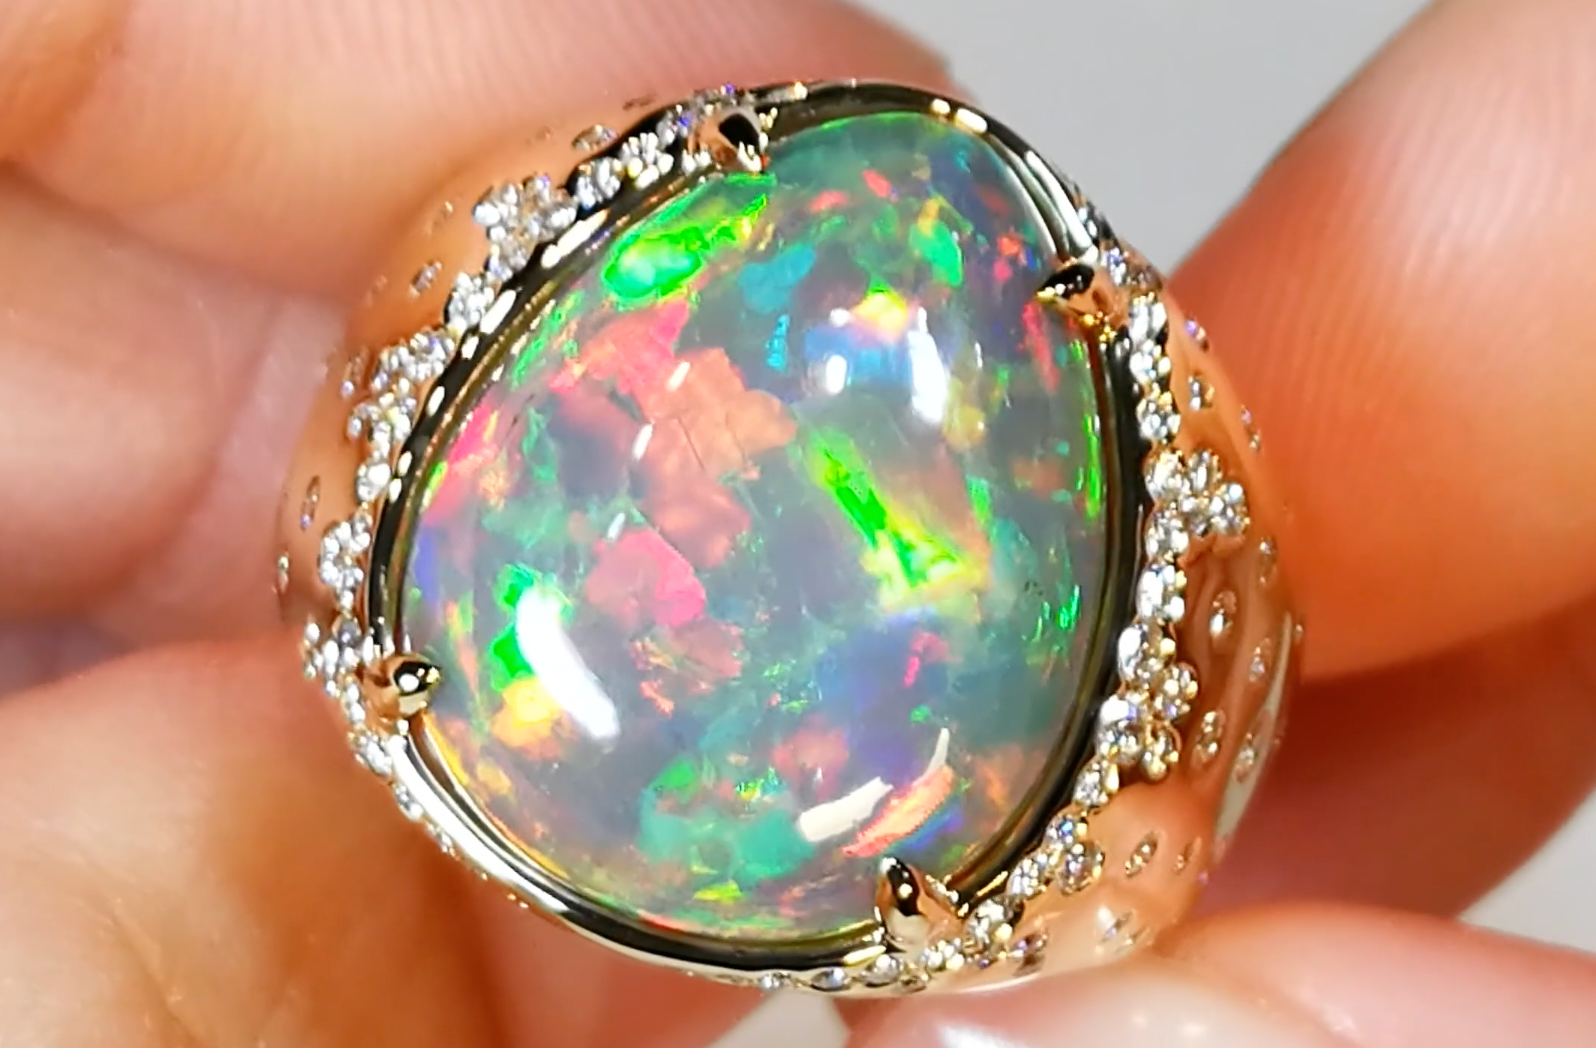 10.40ct Indonesian Black Opal Ring with D Flawless Diamonds set in 18K Yellow Gold